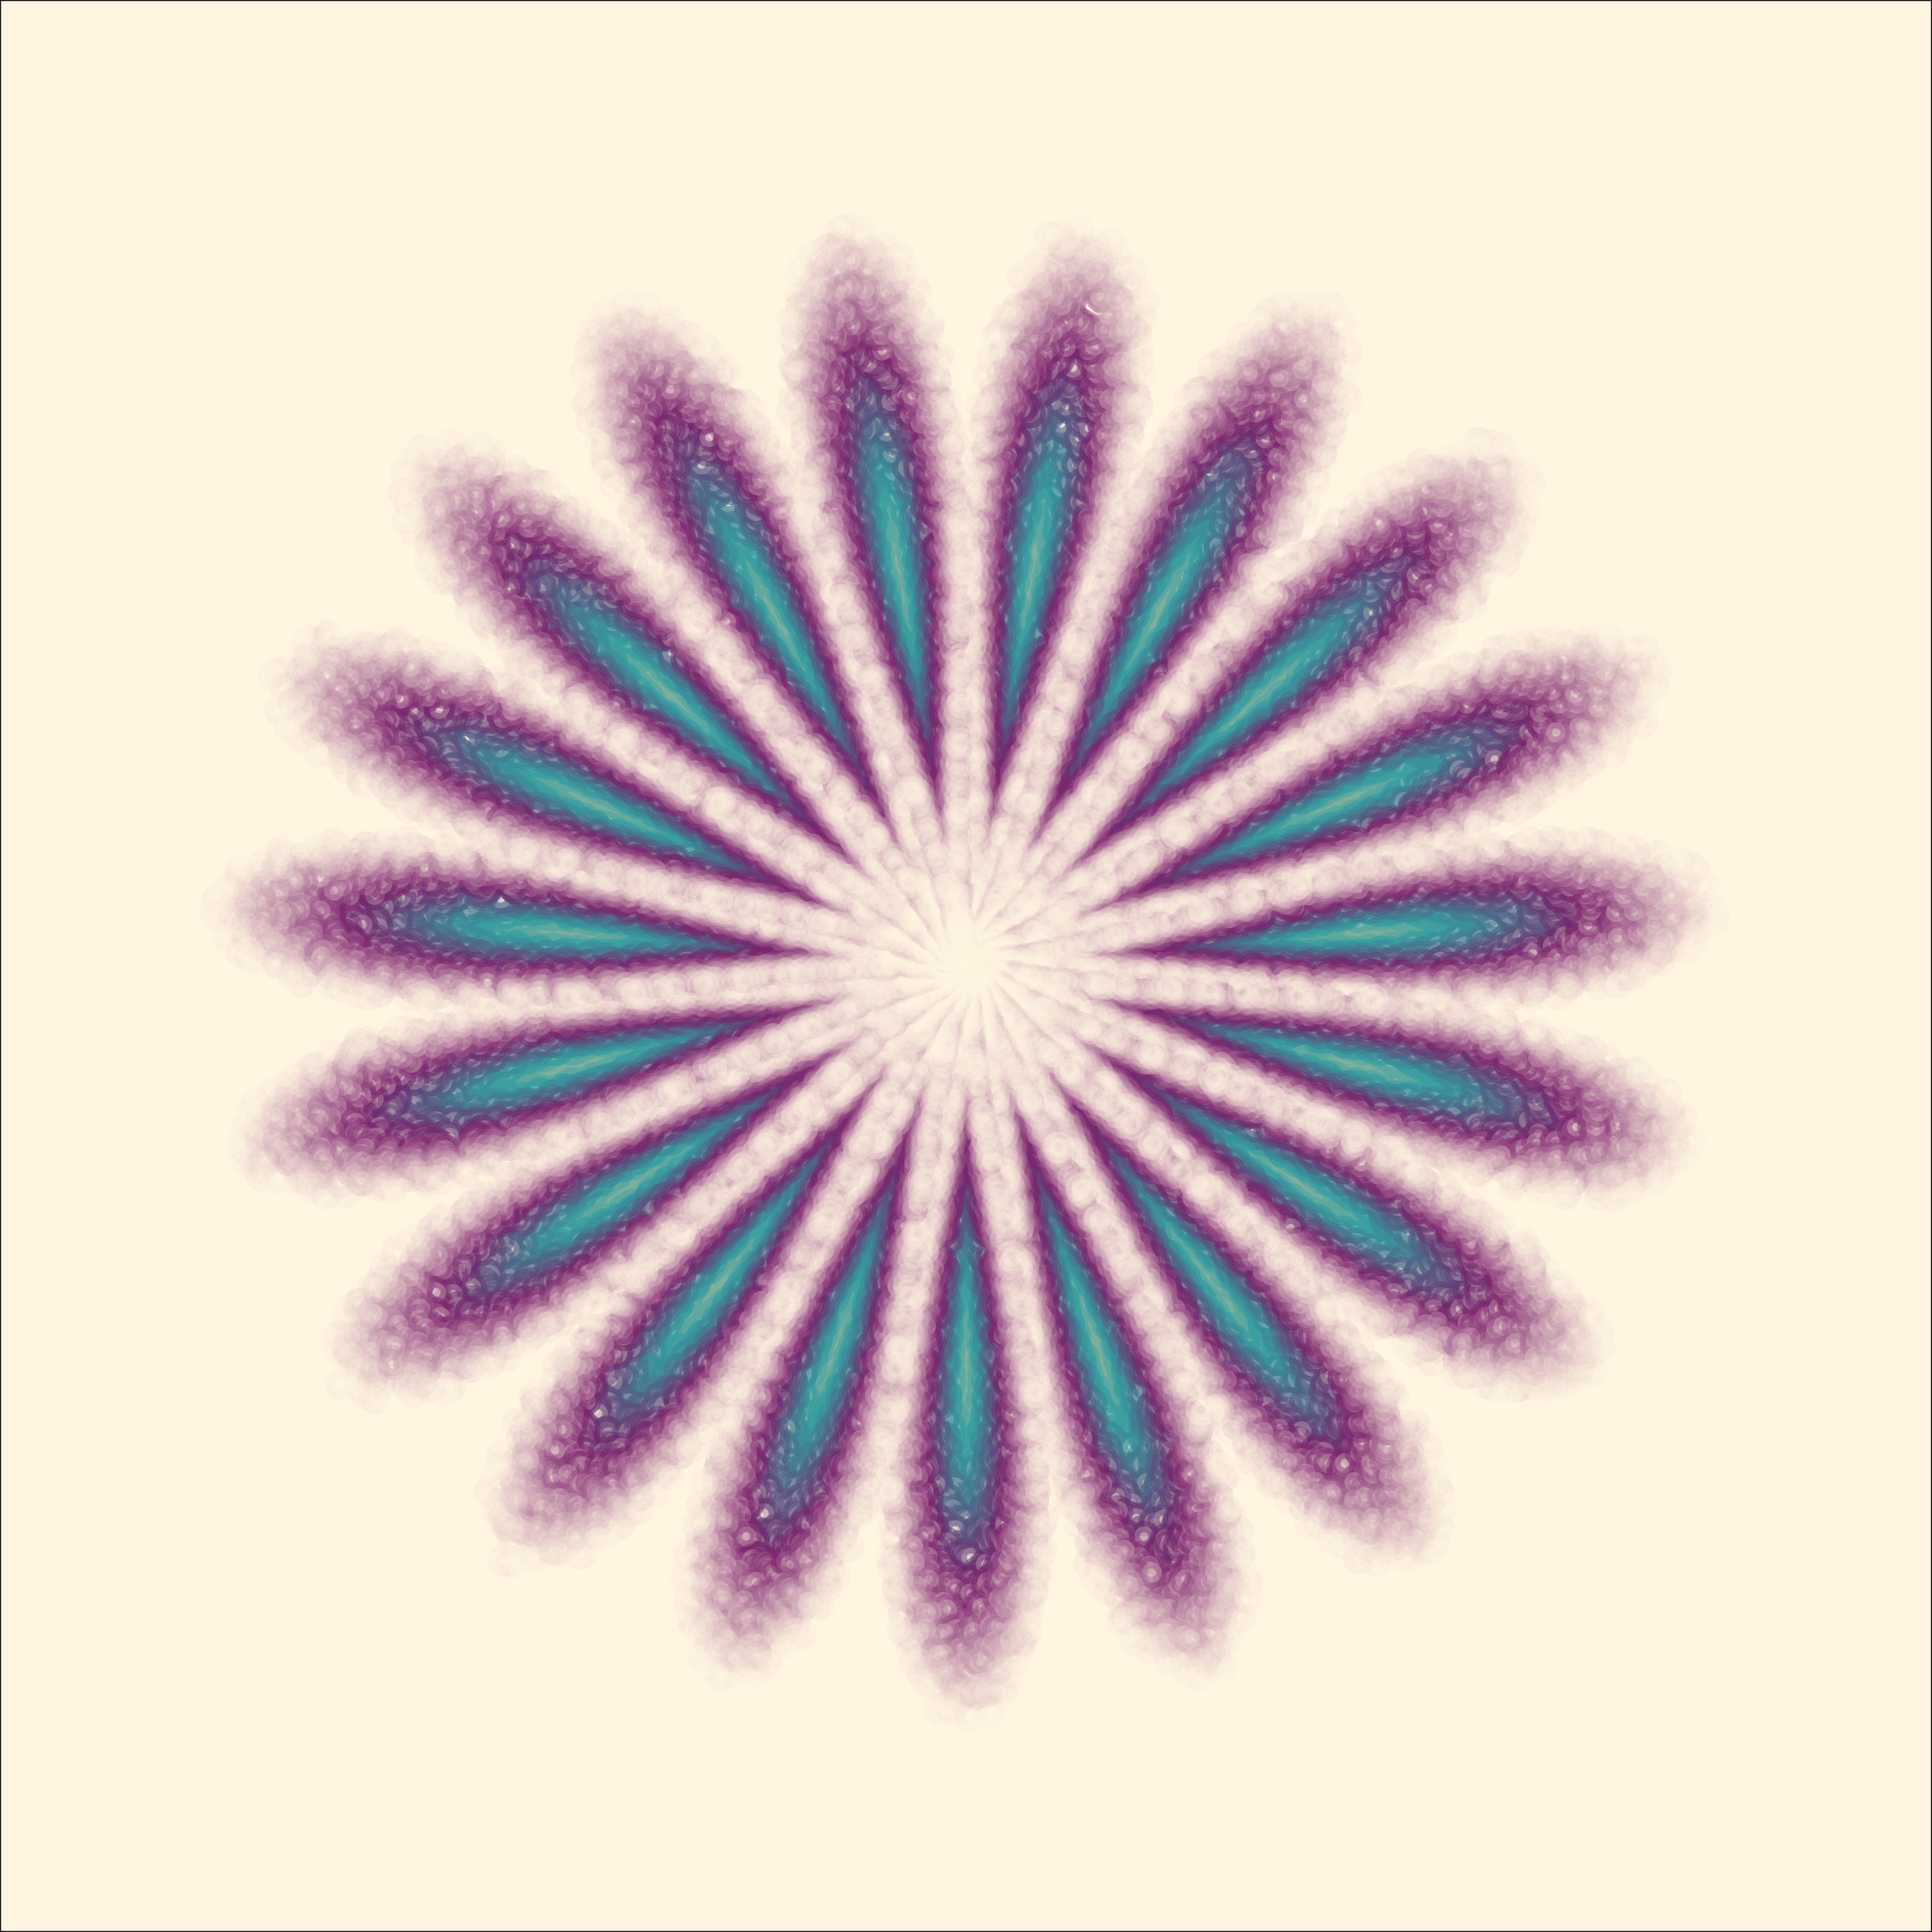 An image of a textured flower. Each petal has a purple border with blue in the center on a beige background. Smaller circles make up the image and give the illusion of texture.